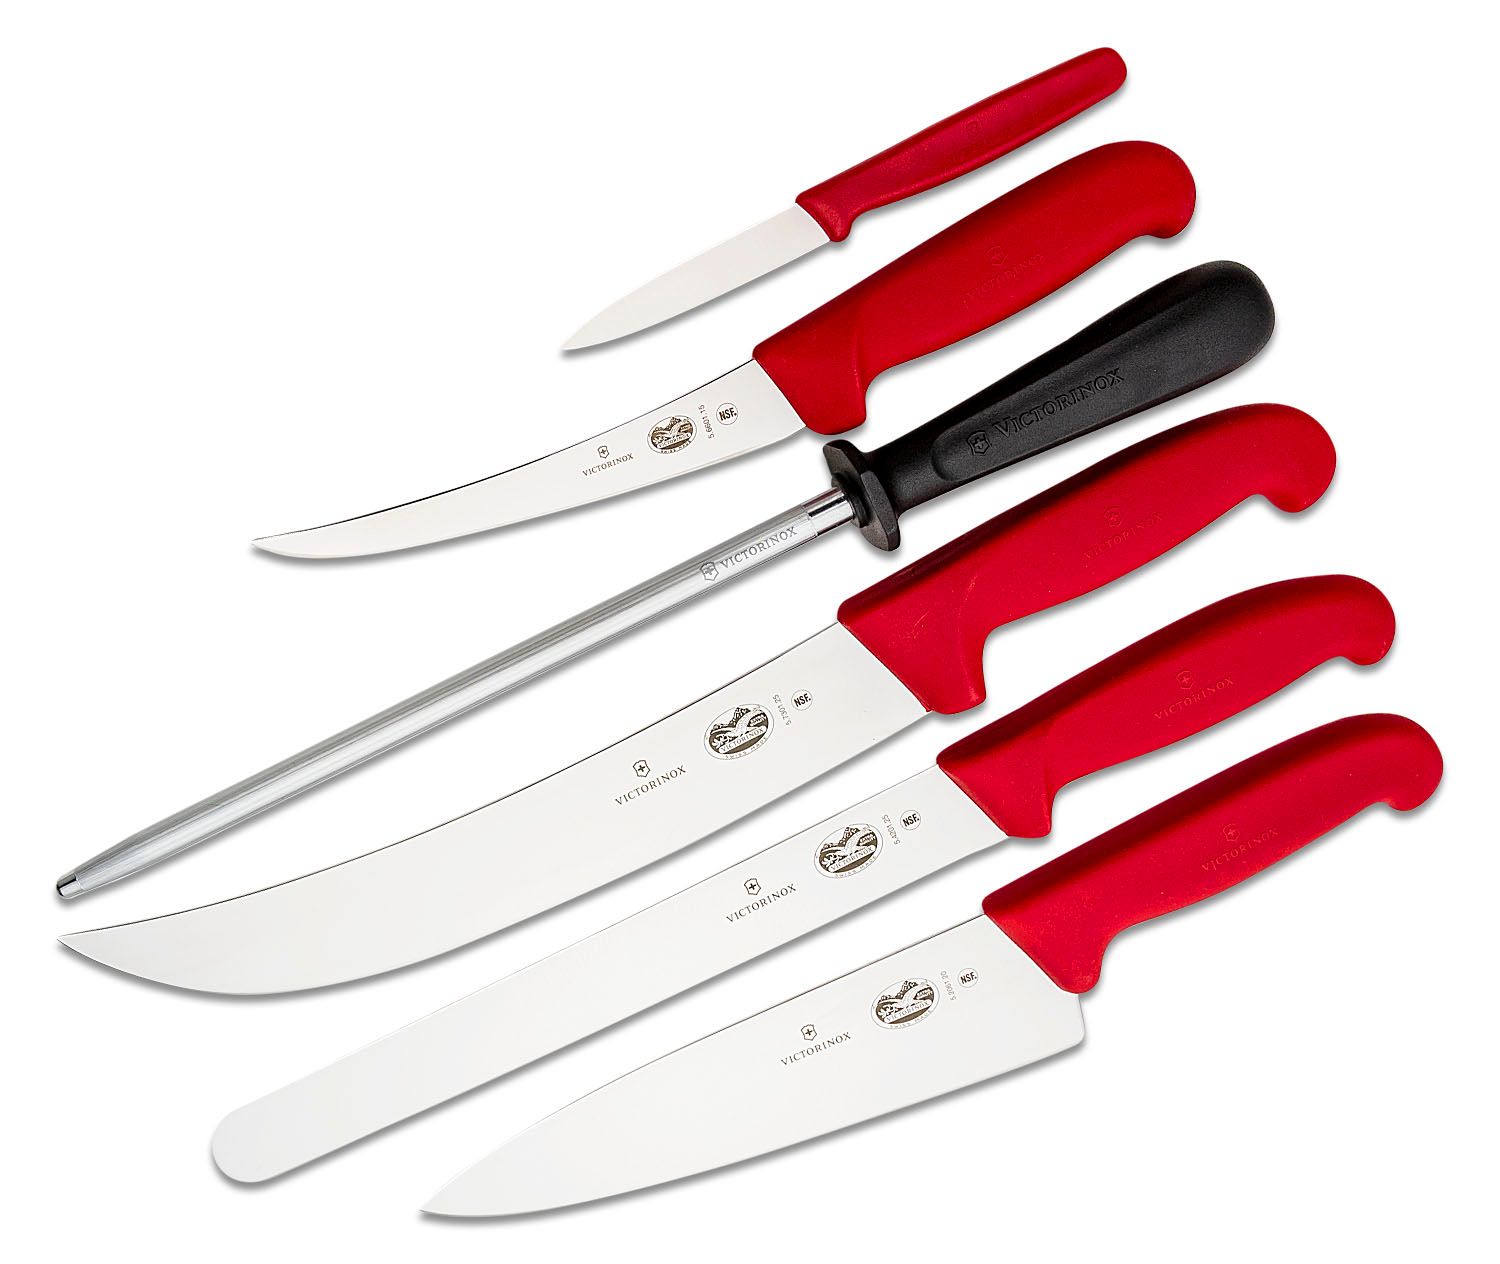 Victorinox 7-Piece Fibrox Knife Set with Carrying Case